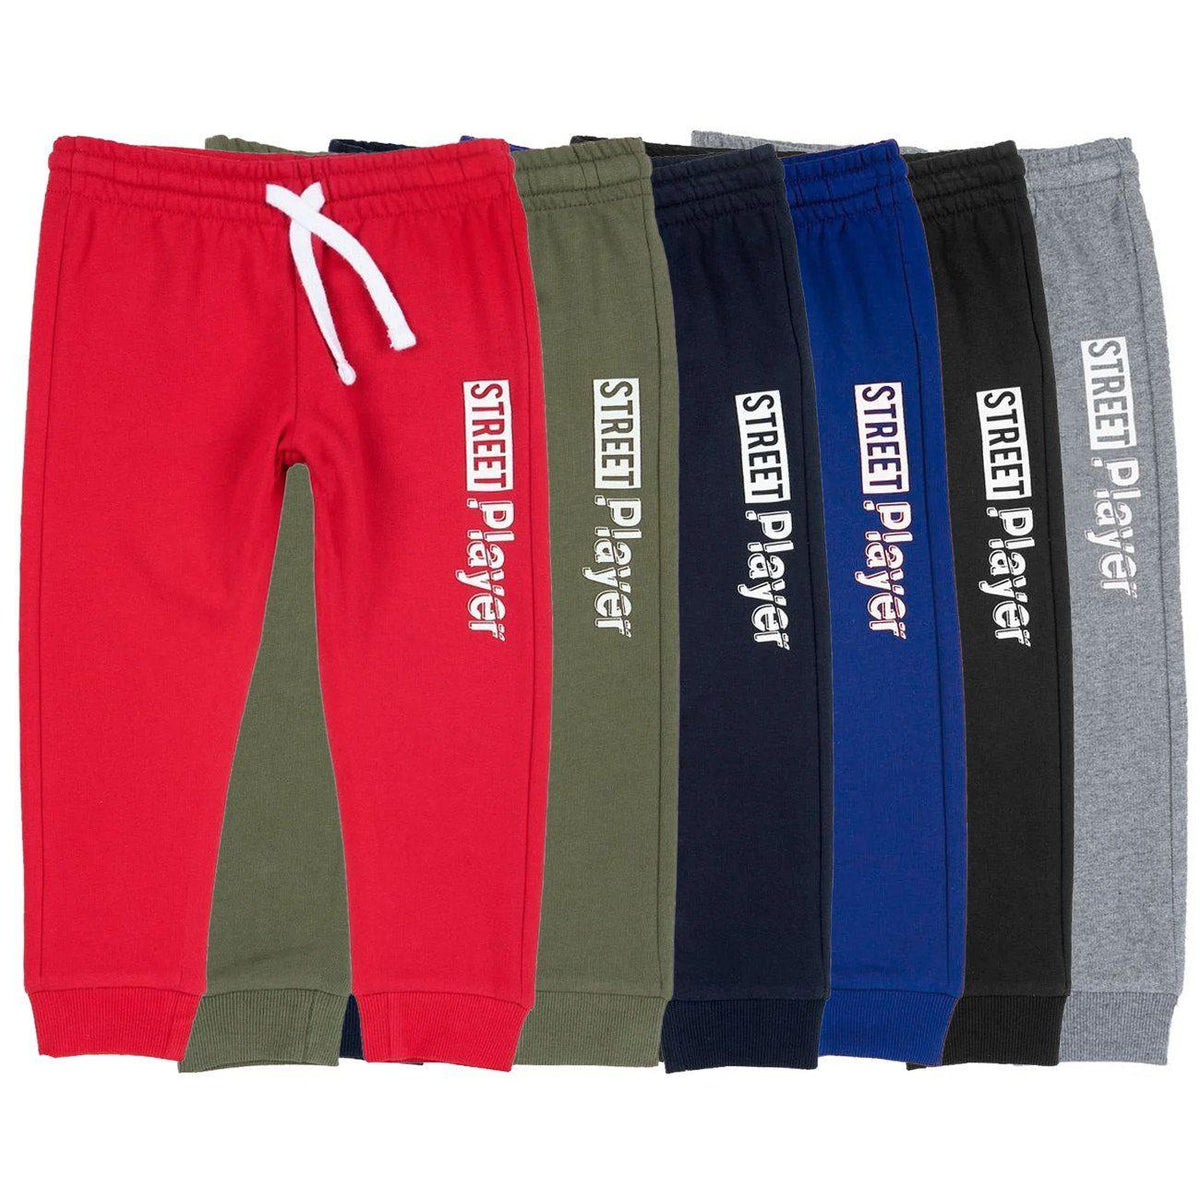 Premium Quality &quot;STREET PLAYER&quot; Printed Sports Trouser For Kids - Brands River